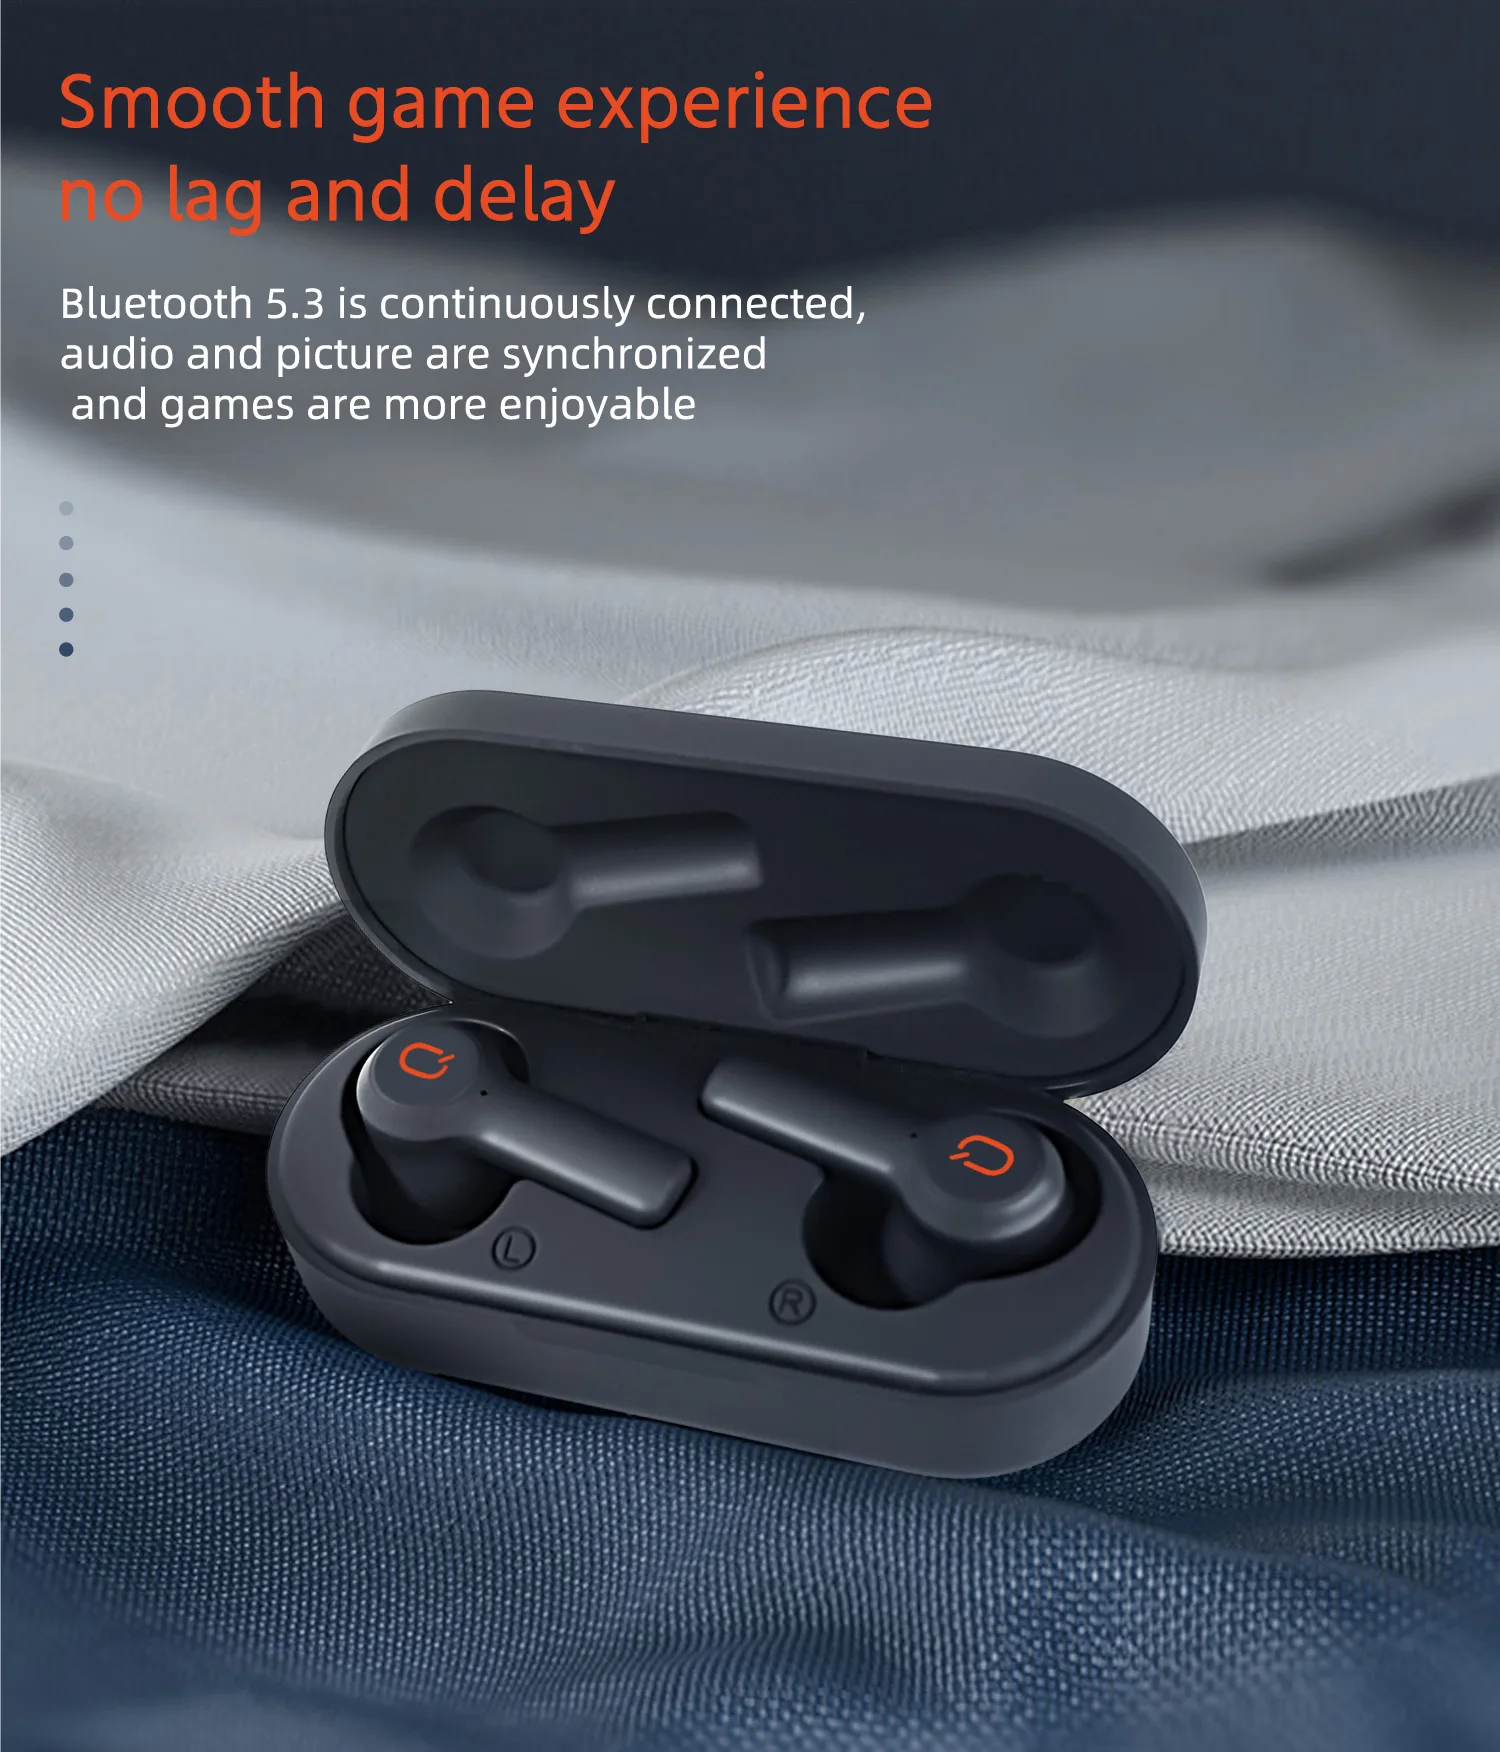 Wireless Bluetooth Earbuds- smooth game experience no lag and delay- Smart cell direct